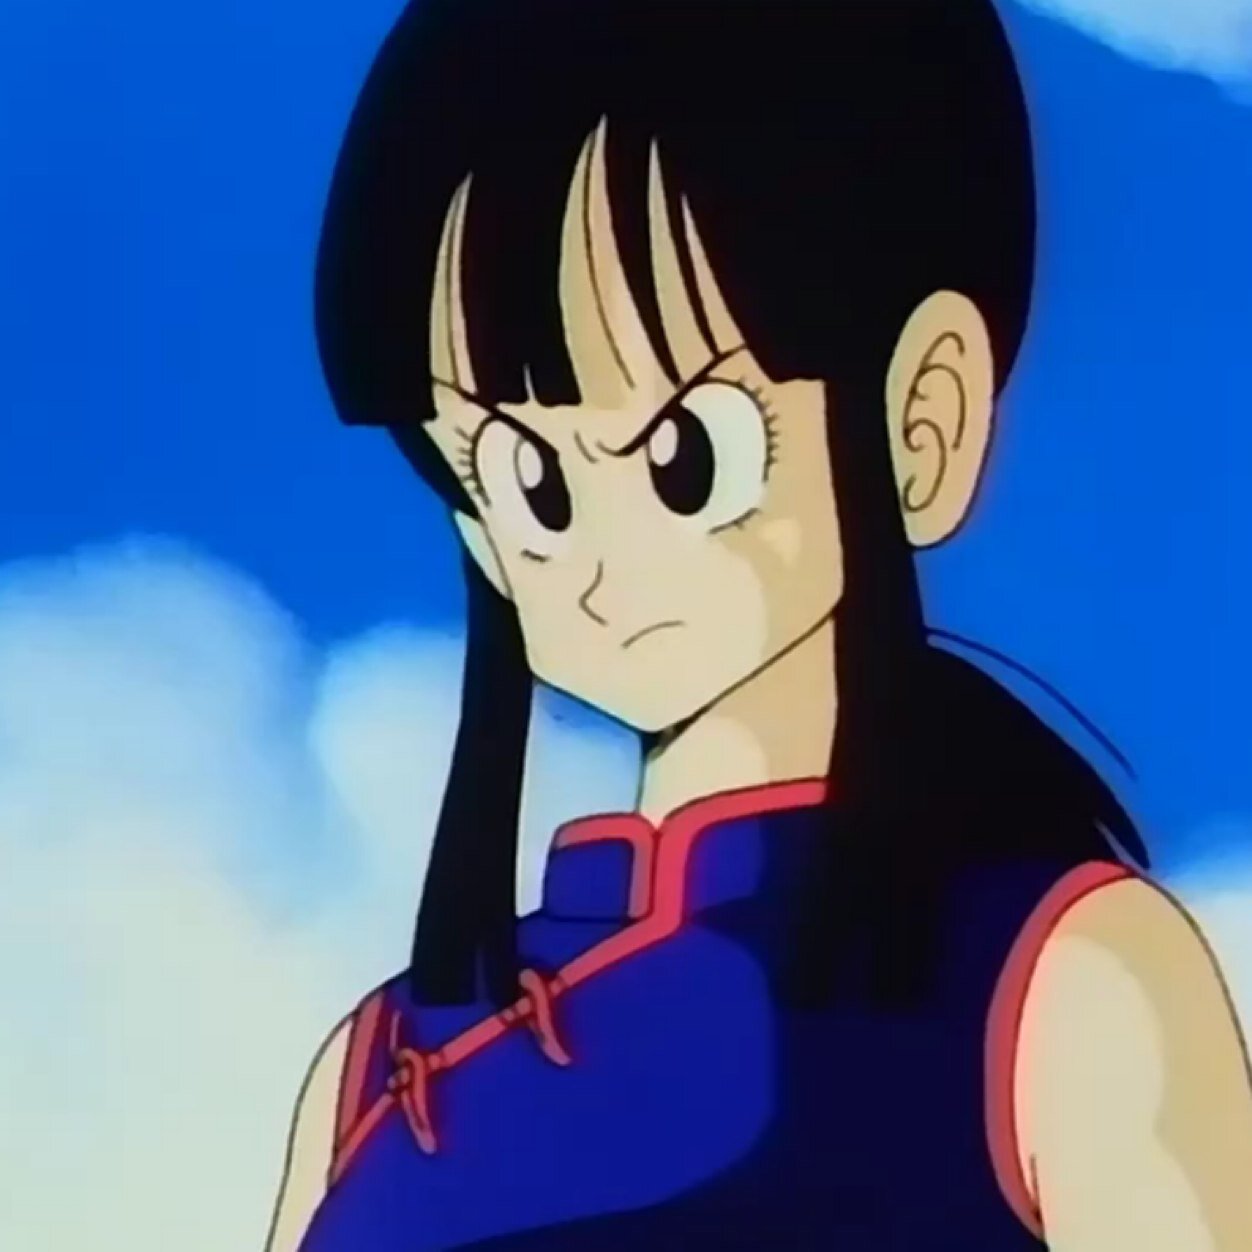 I am Chi Chi, wife to Goku. He is my brave and strong husband, and we have two lovely sons called Gohan and Goten.